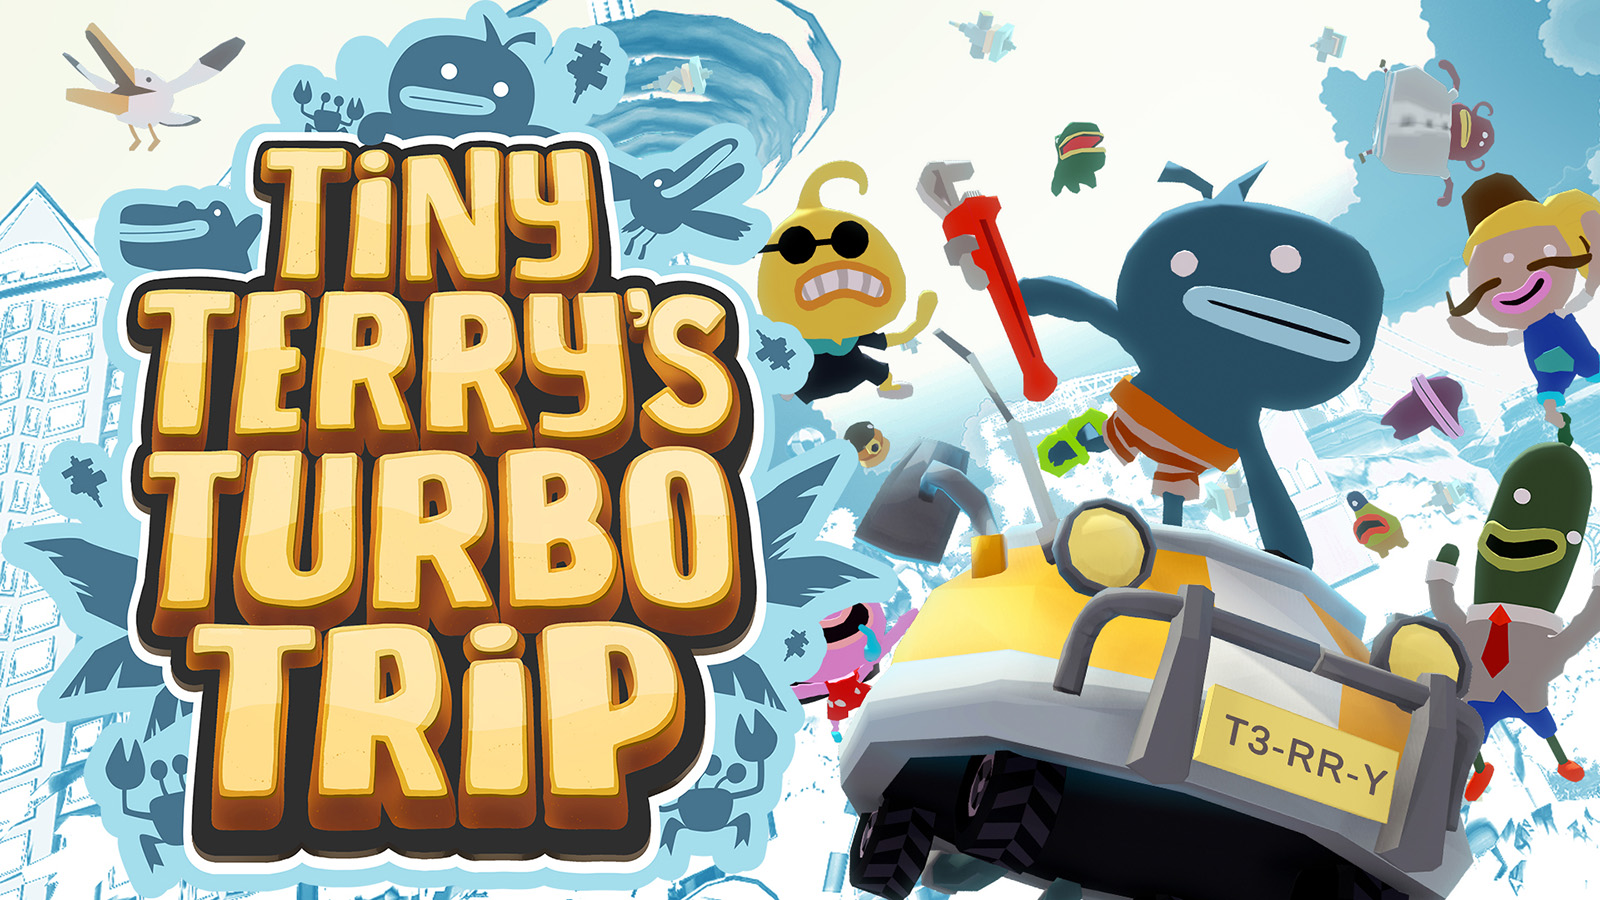 The artwork for Tiny Terry's Turbo Trip, showcasing Terry riding a car and some of the residents of Sprankelwater.